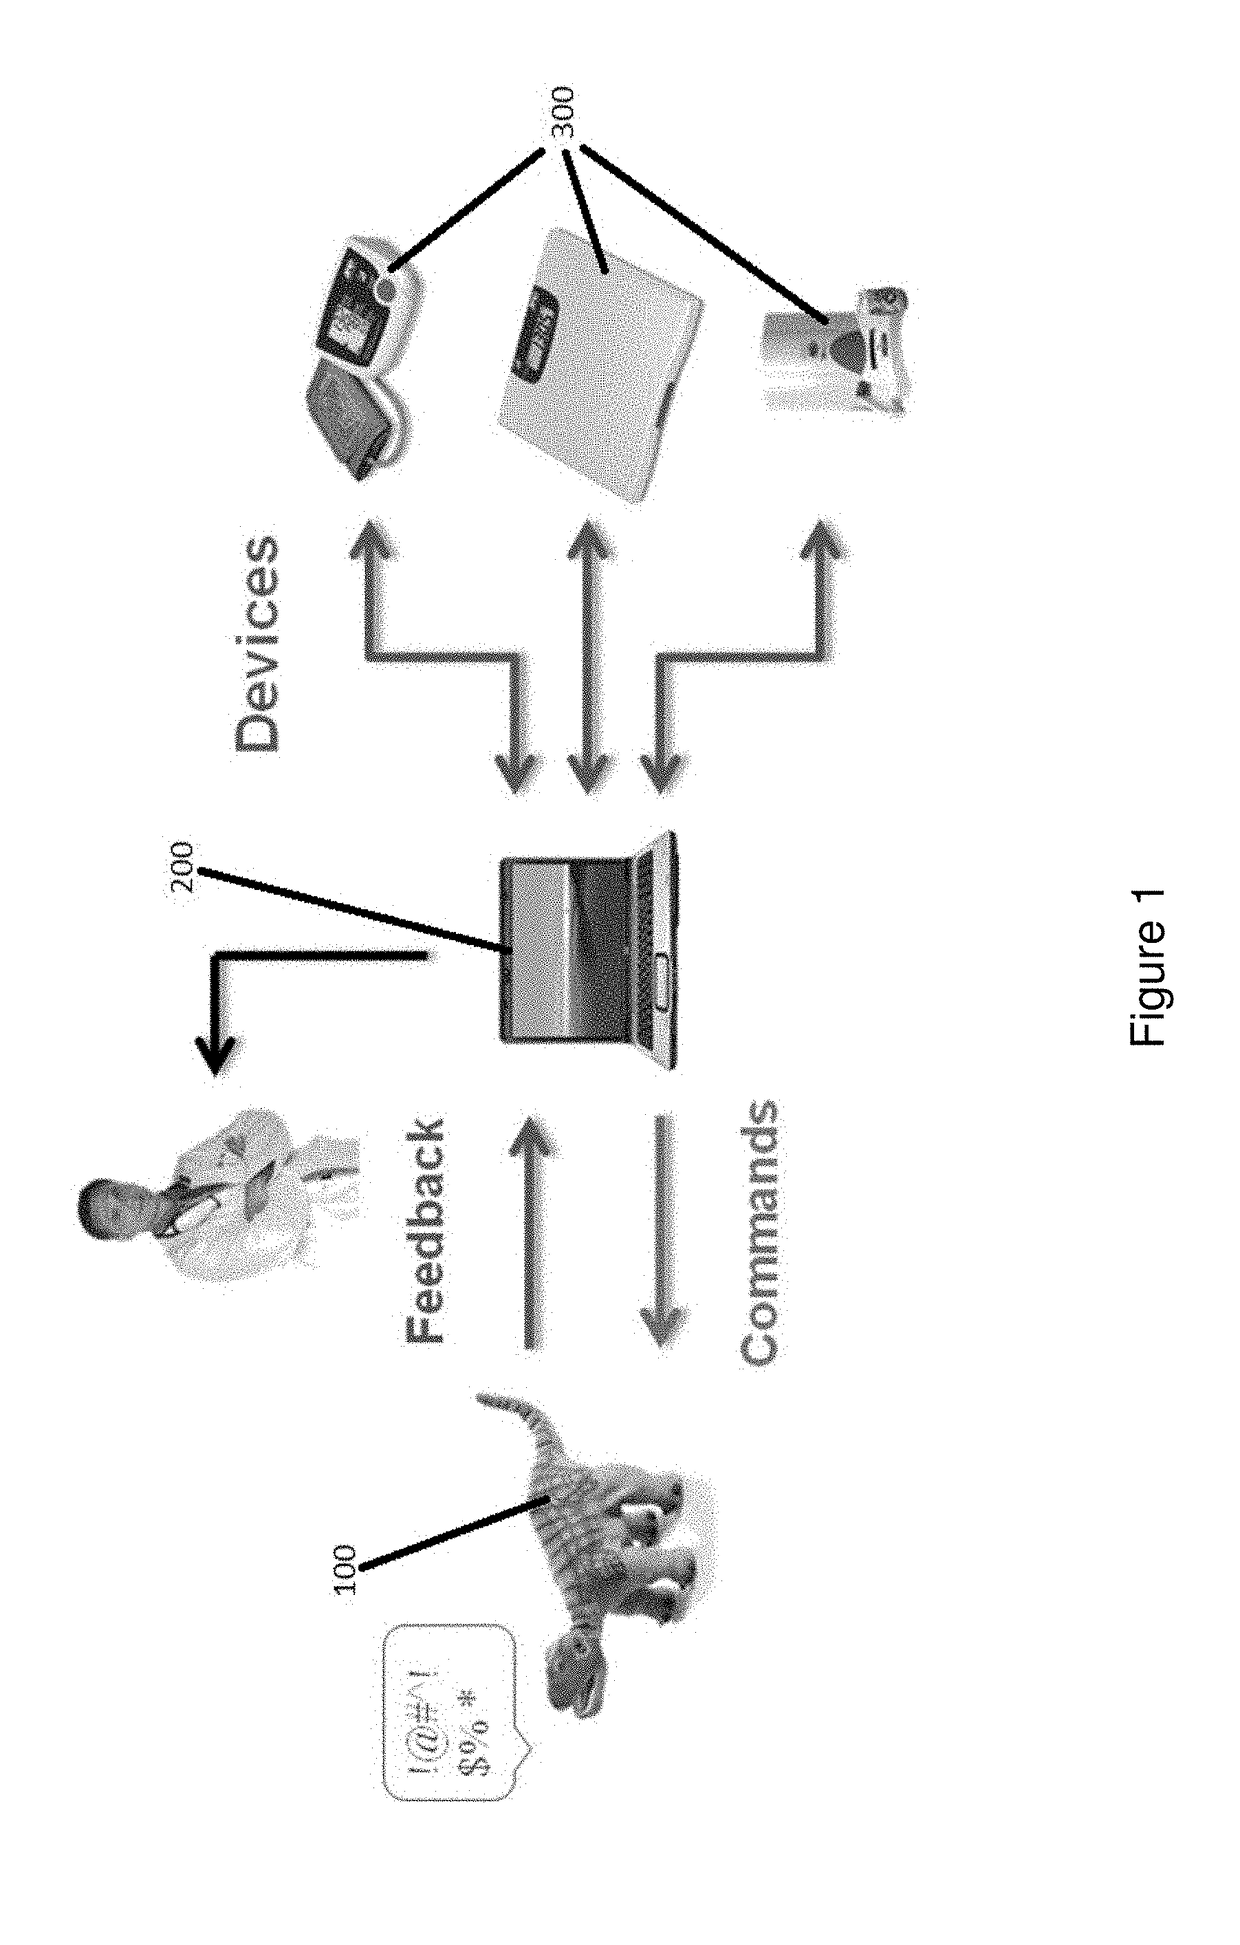 System and method for improving healthcare through social robotics